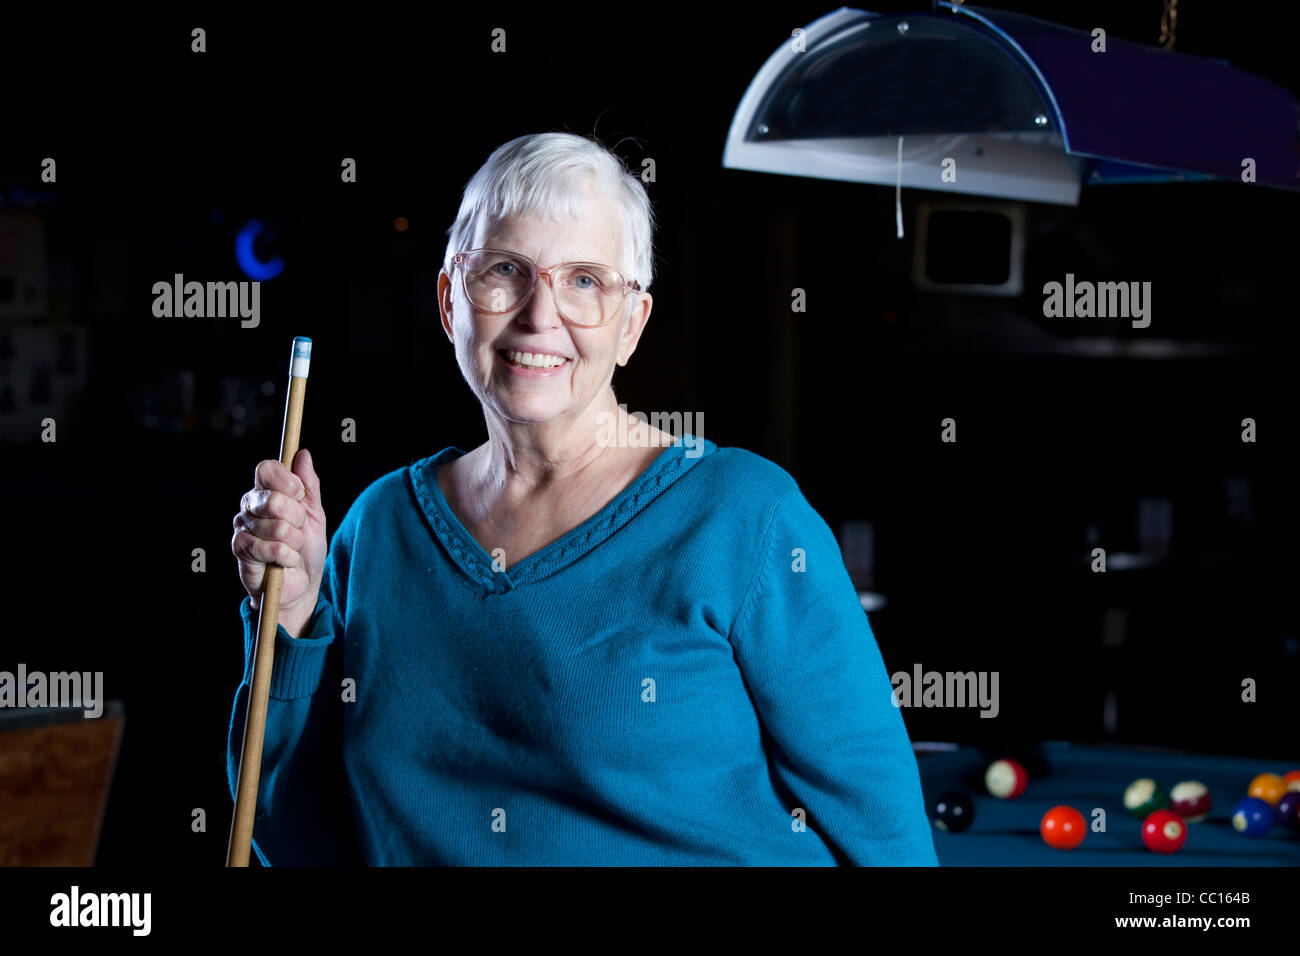 Senior citizen standing by a pool table holding a pool cue. Stock Photo